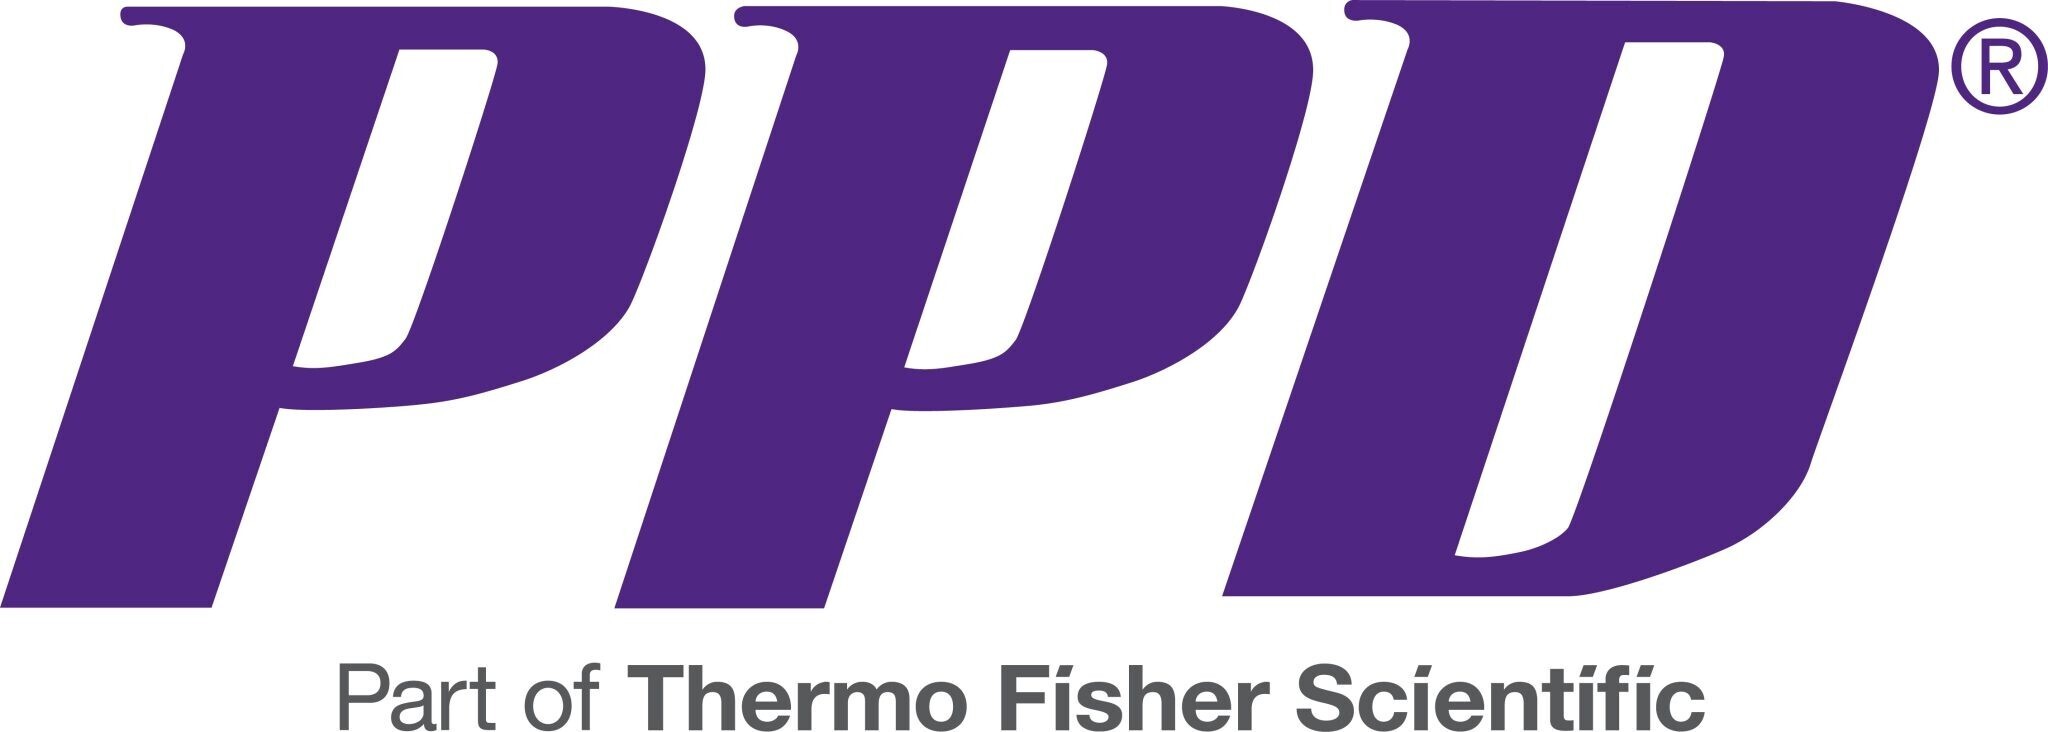 PPD (ThermoFisher Scientific) Logo